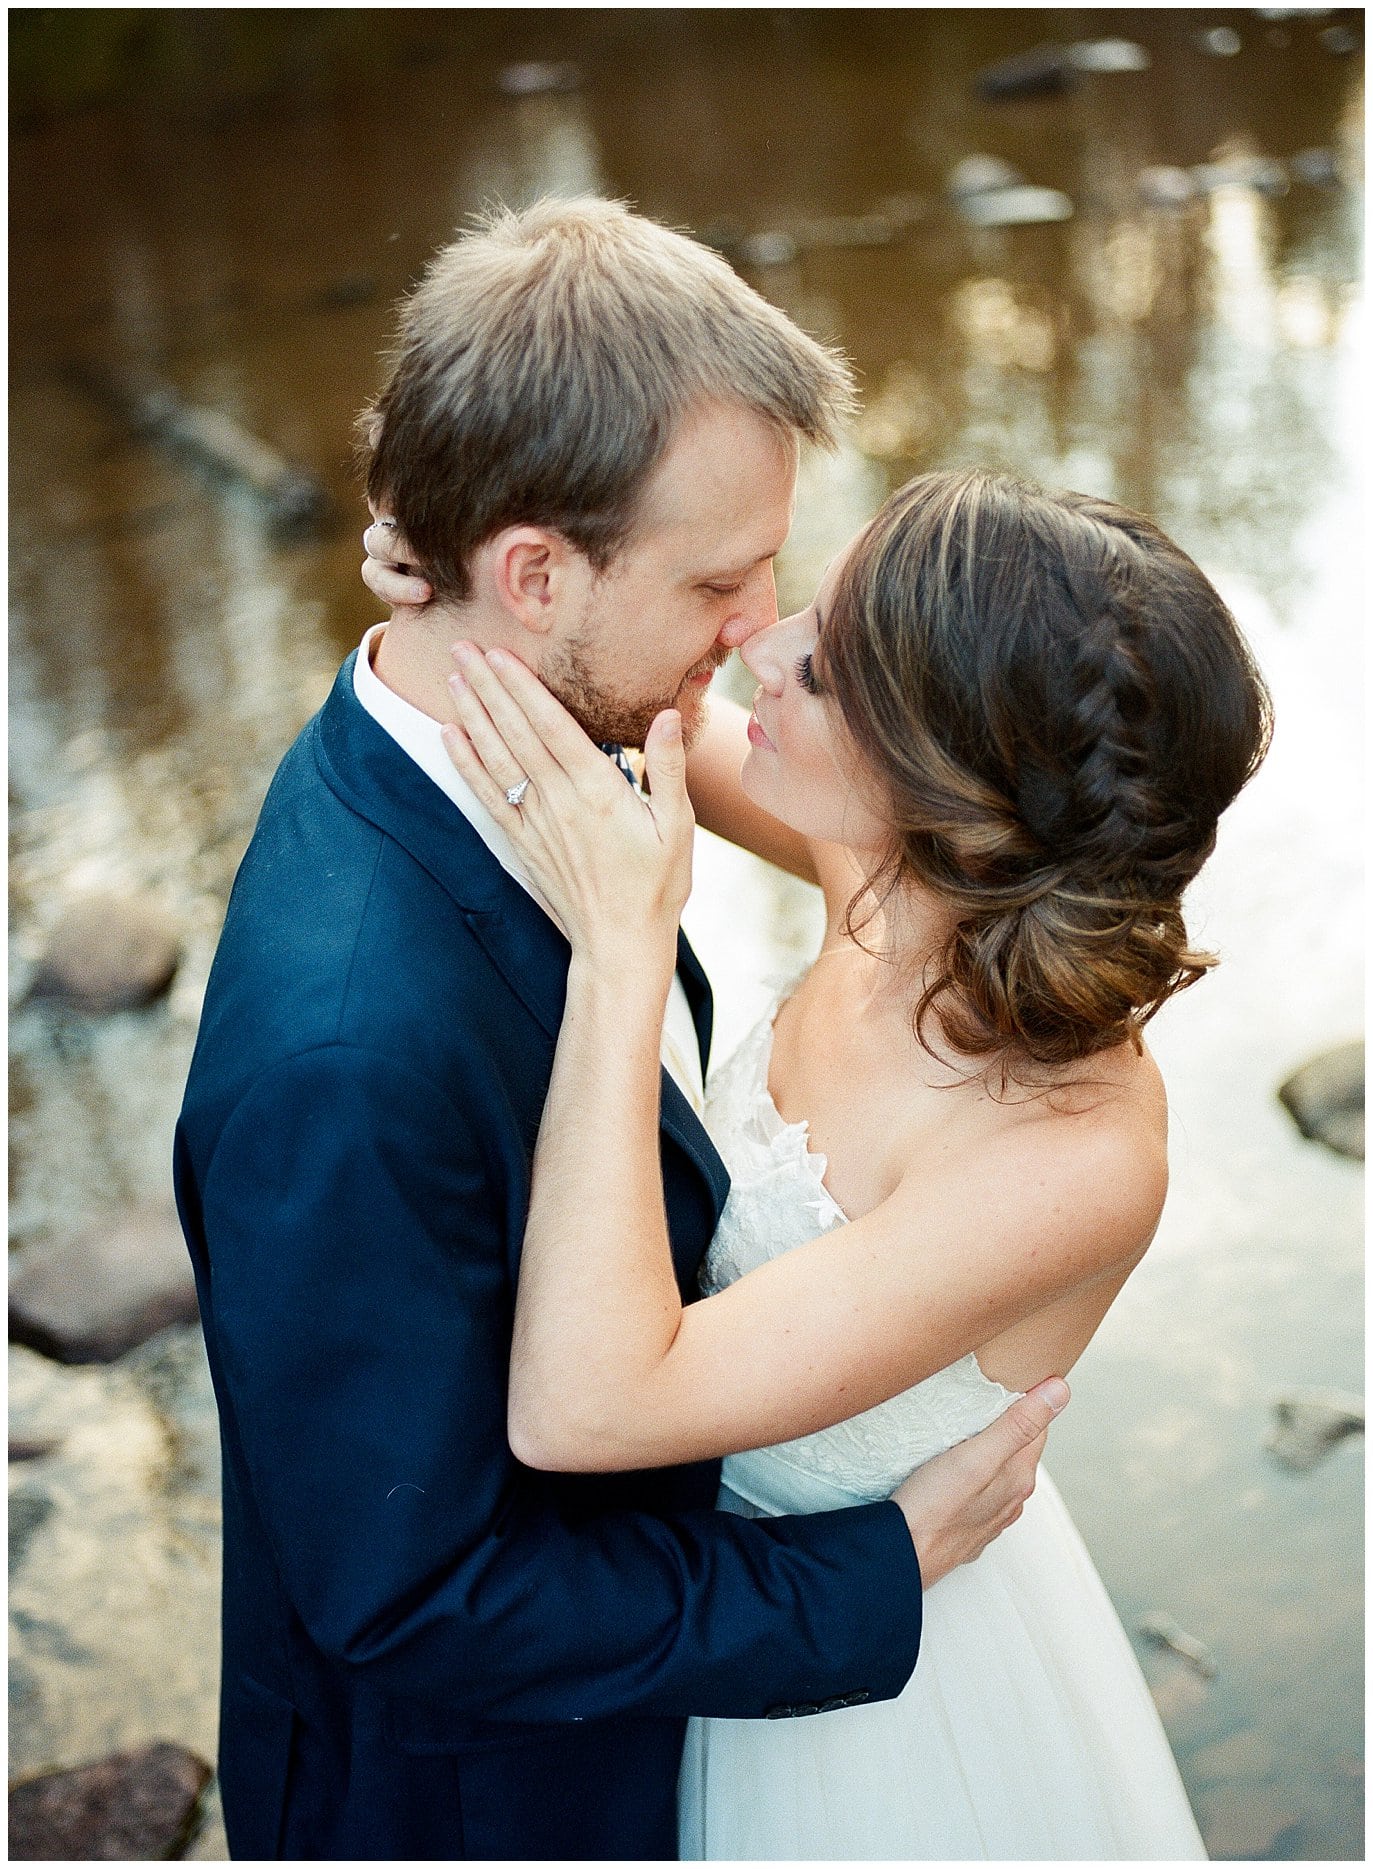 romantic wedding day kiss at Piney River Ranch intimate wedding by Aspen wedding photographer Jennie Crate Photographer